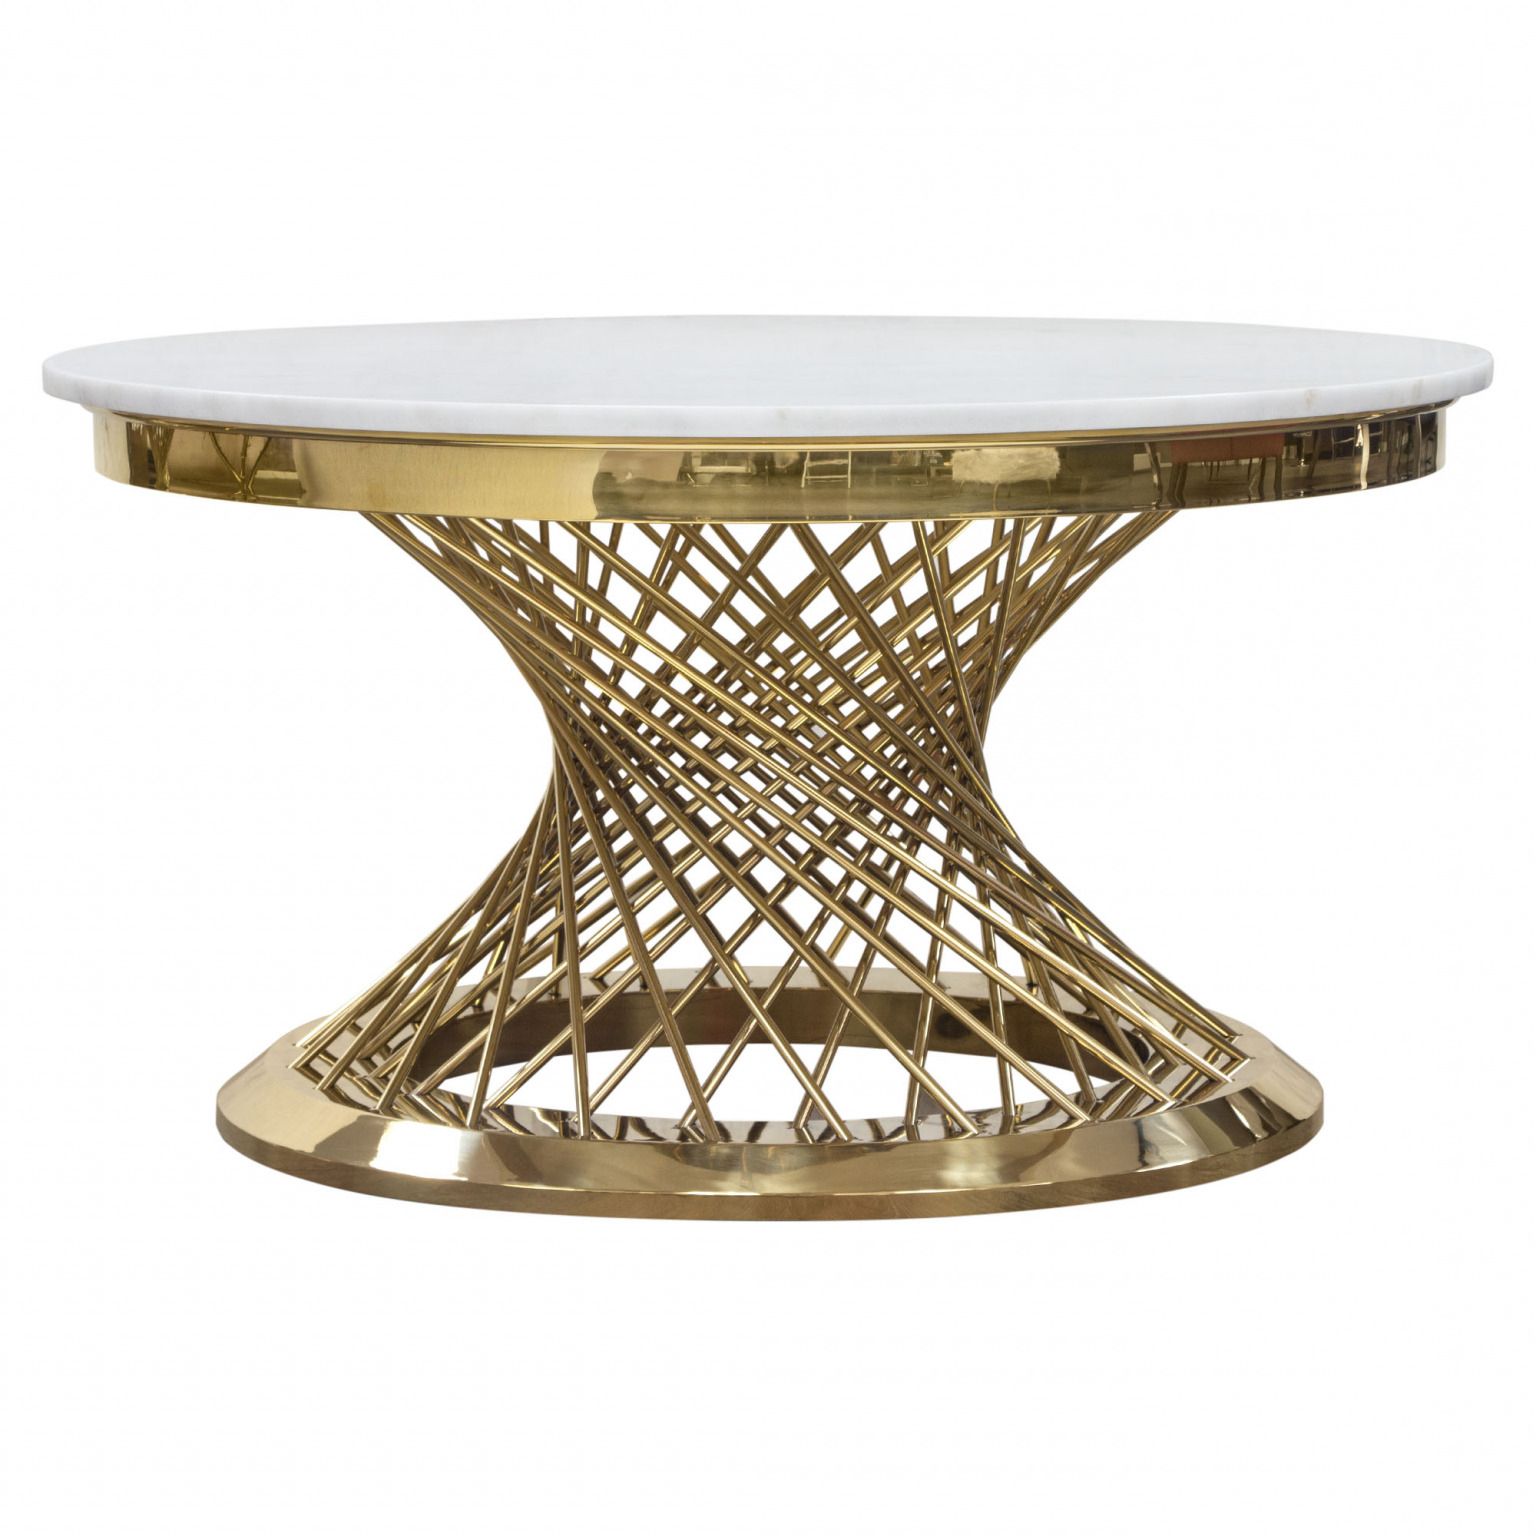 Solstice 35" Round Cocktail Table With Genuine Marble Top Within Most Popular Polished Chrome Round Cocktail Tables (View 4 of 20)